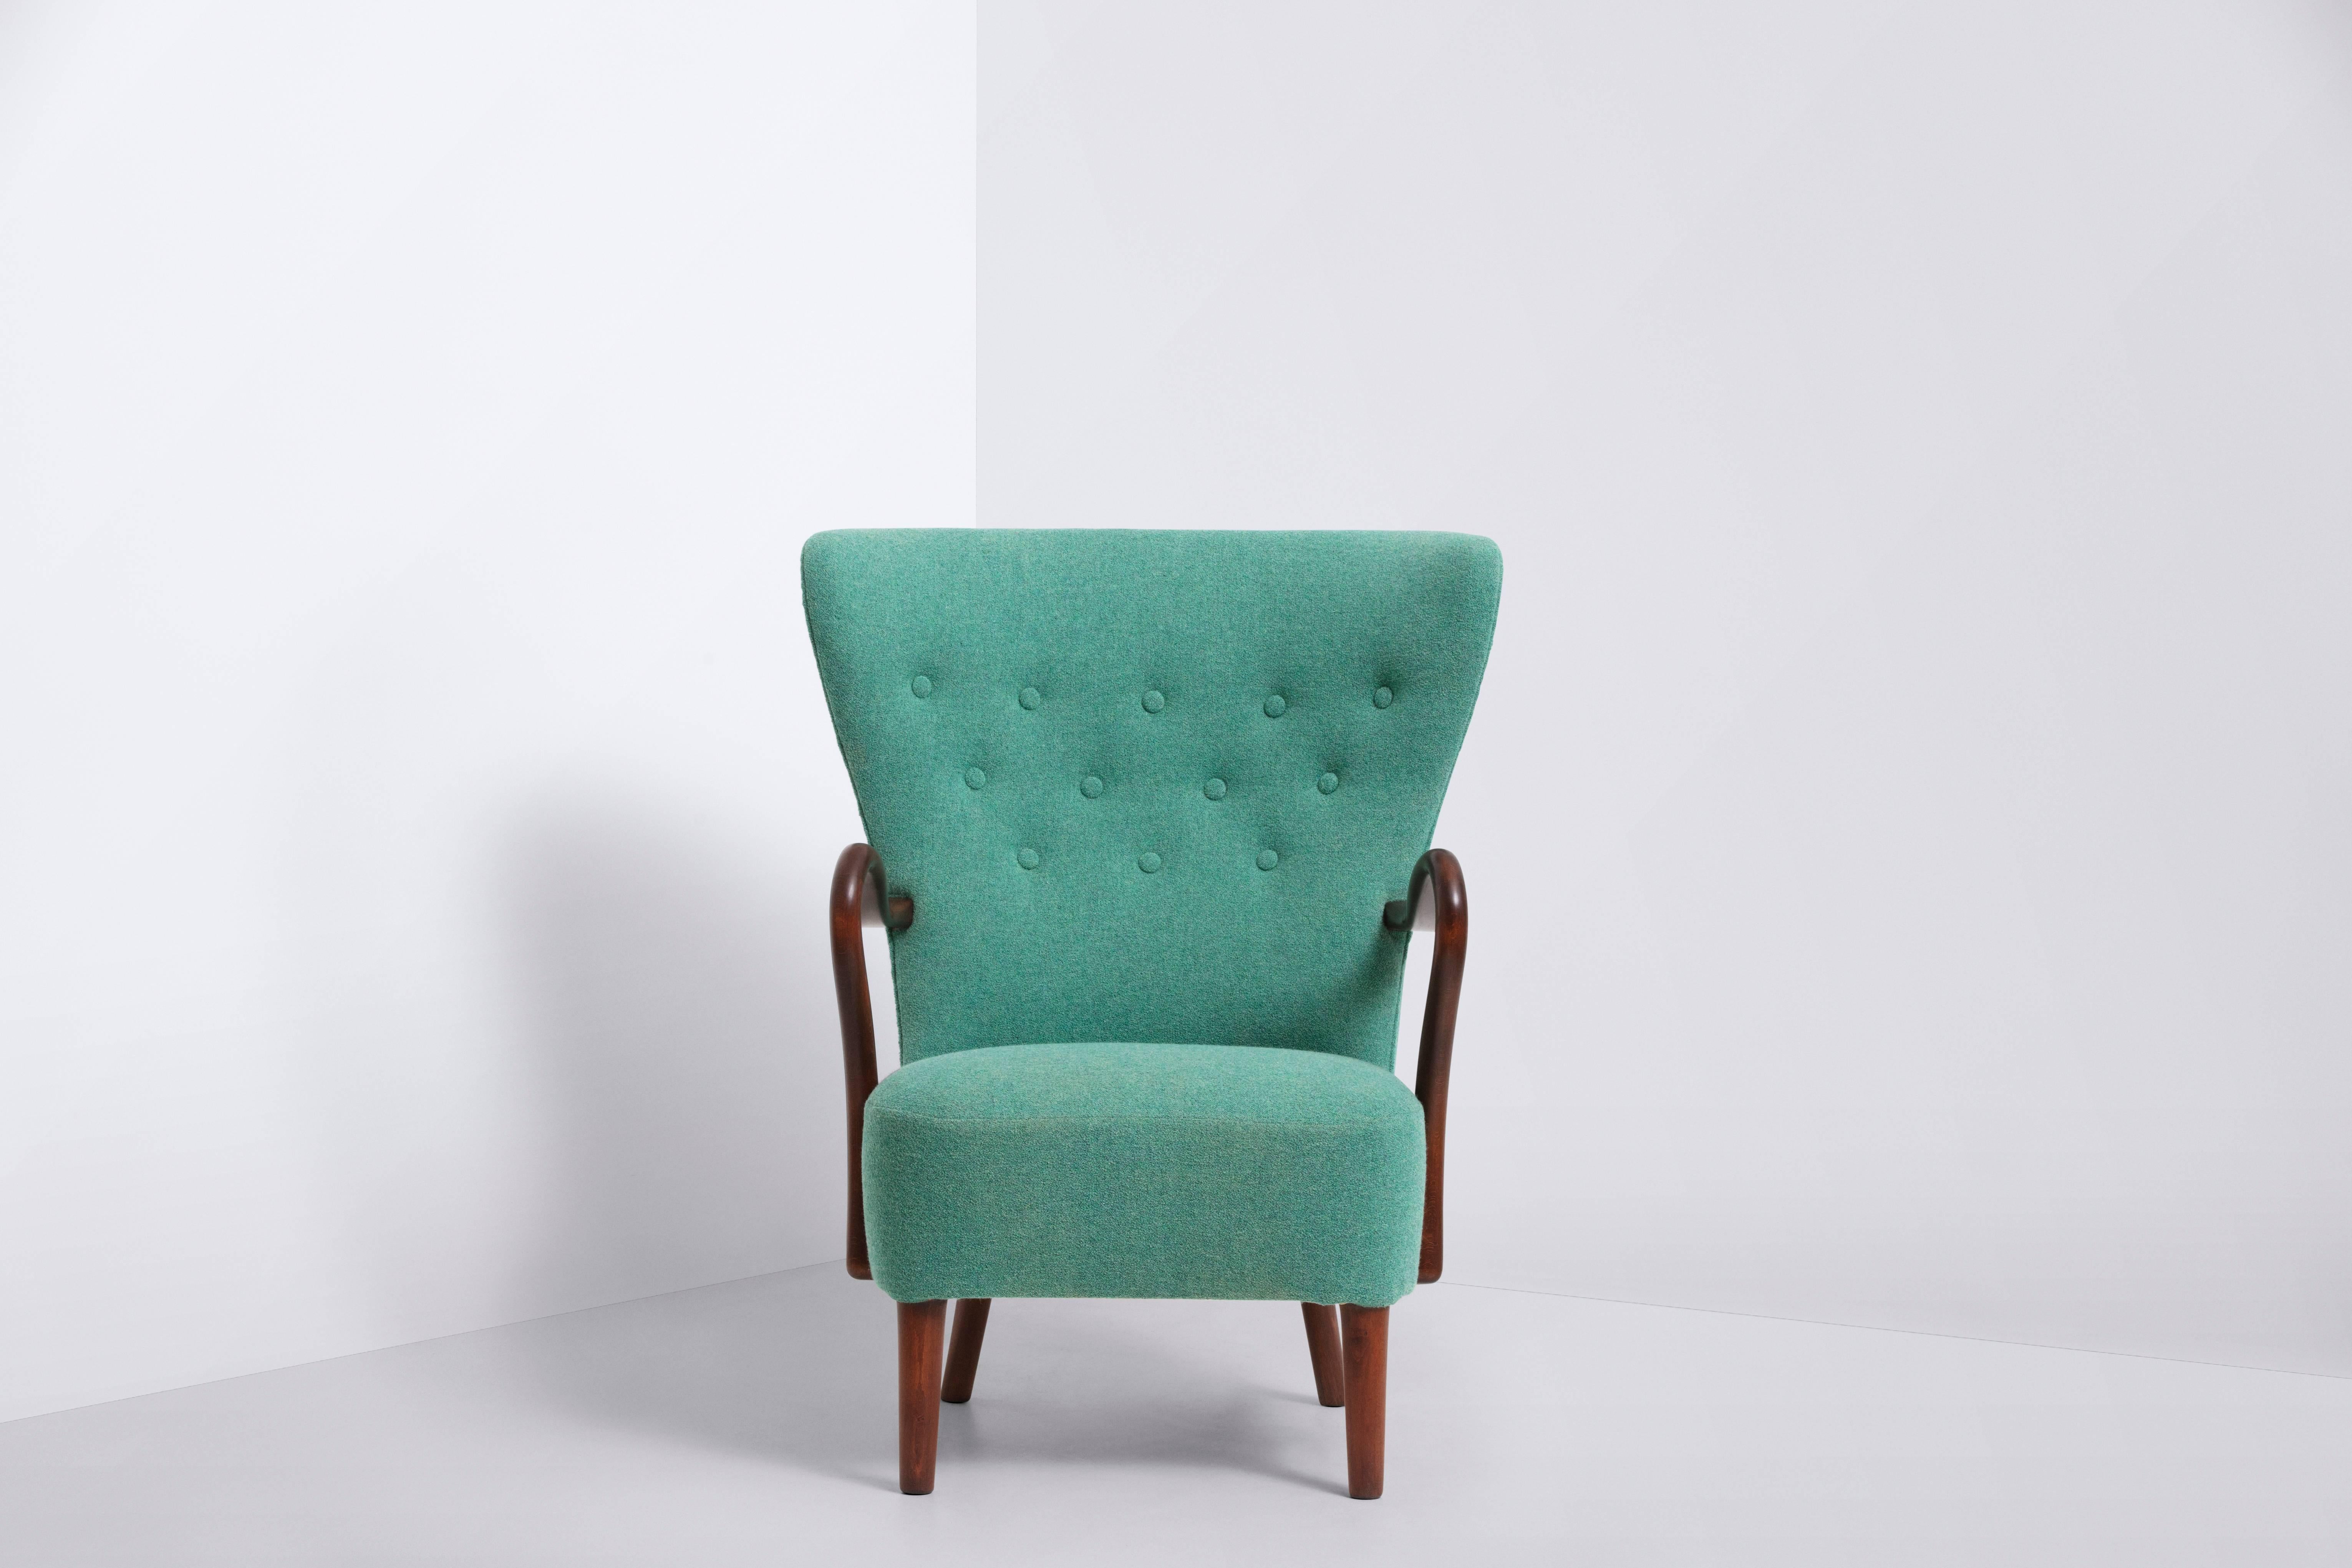 Frame and armrests of solid teak
Turquoise wool upholstery by Kvadrat.
   